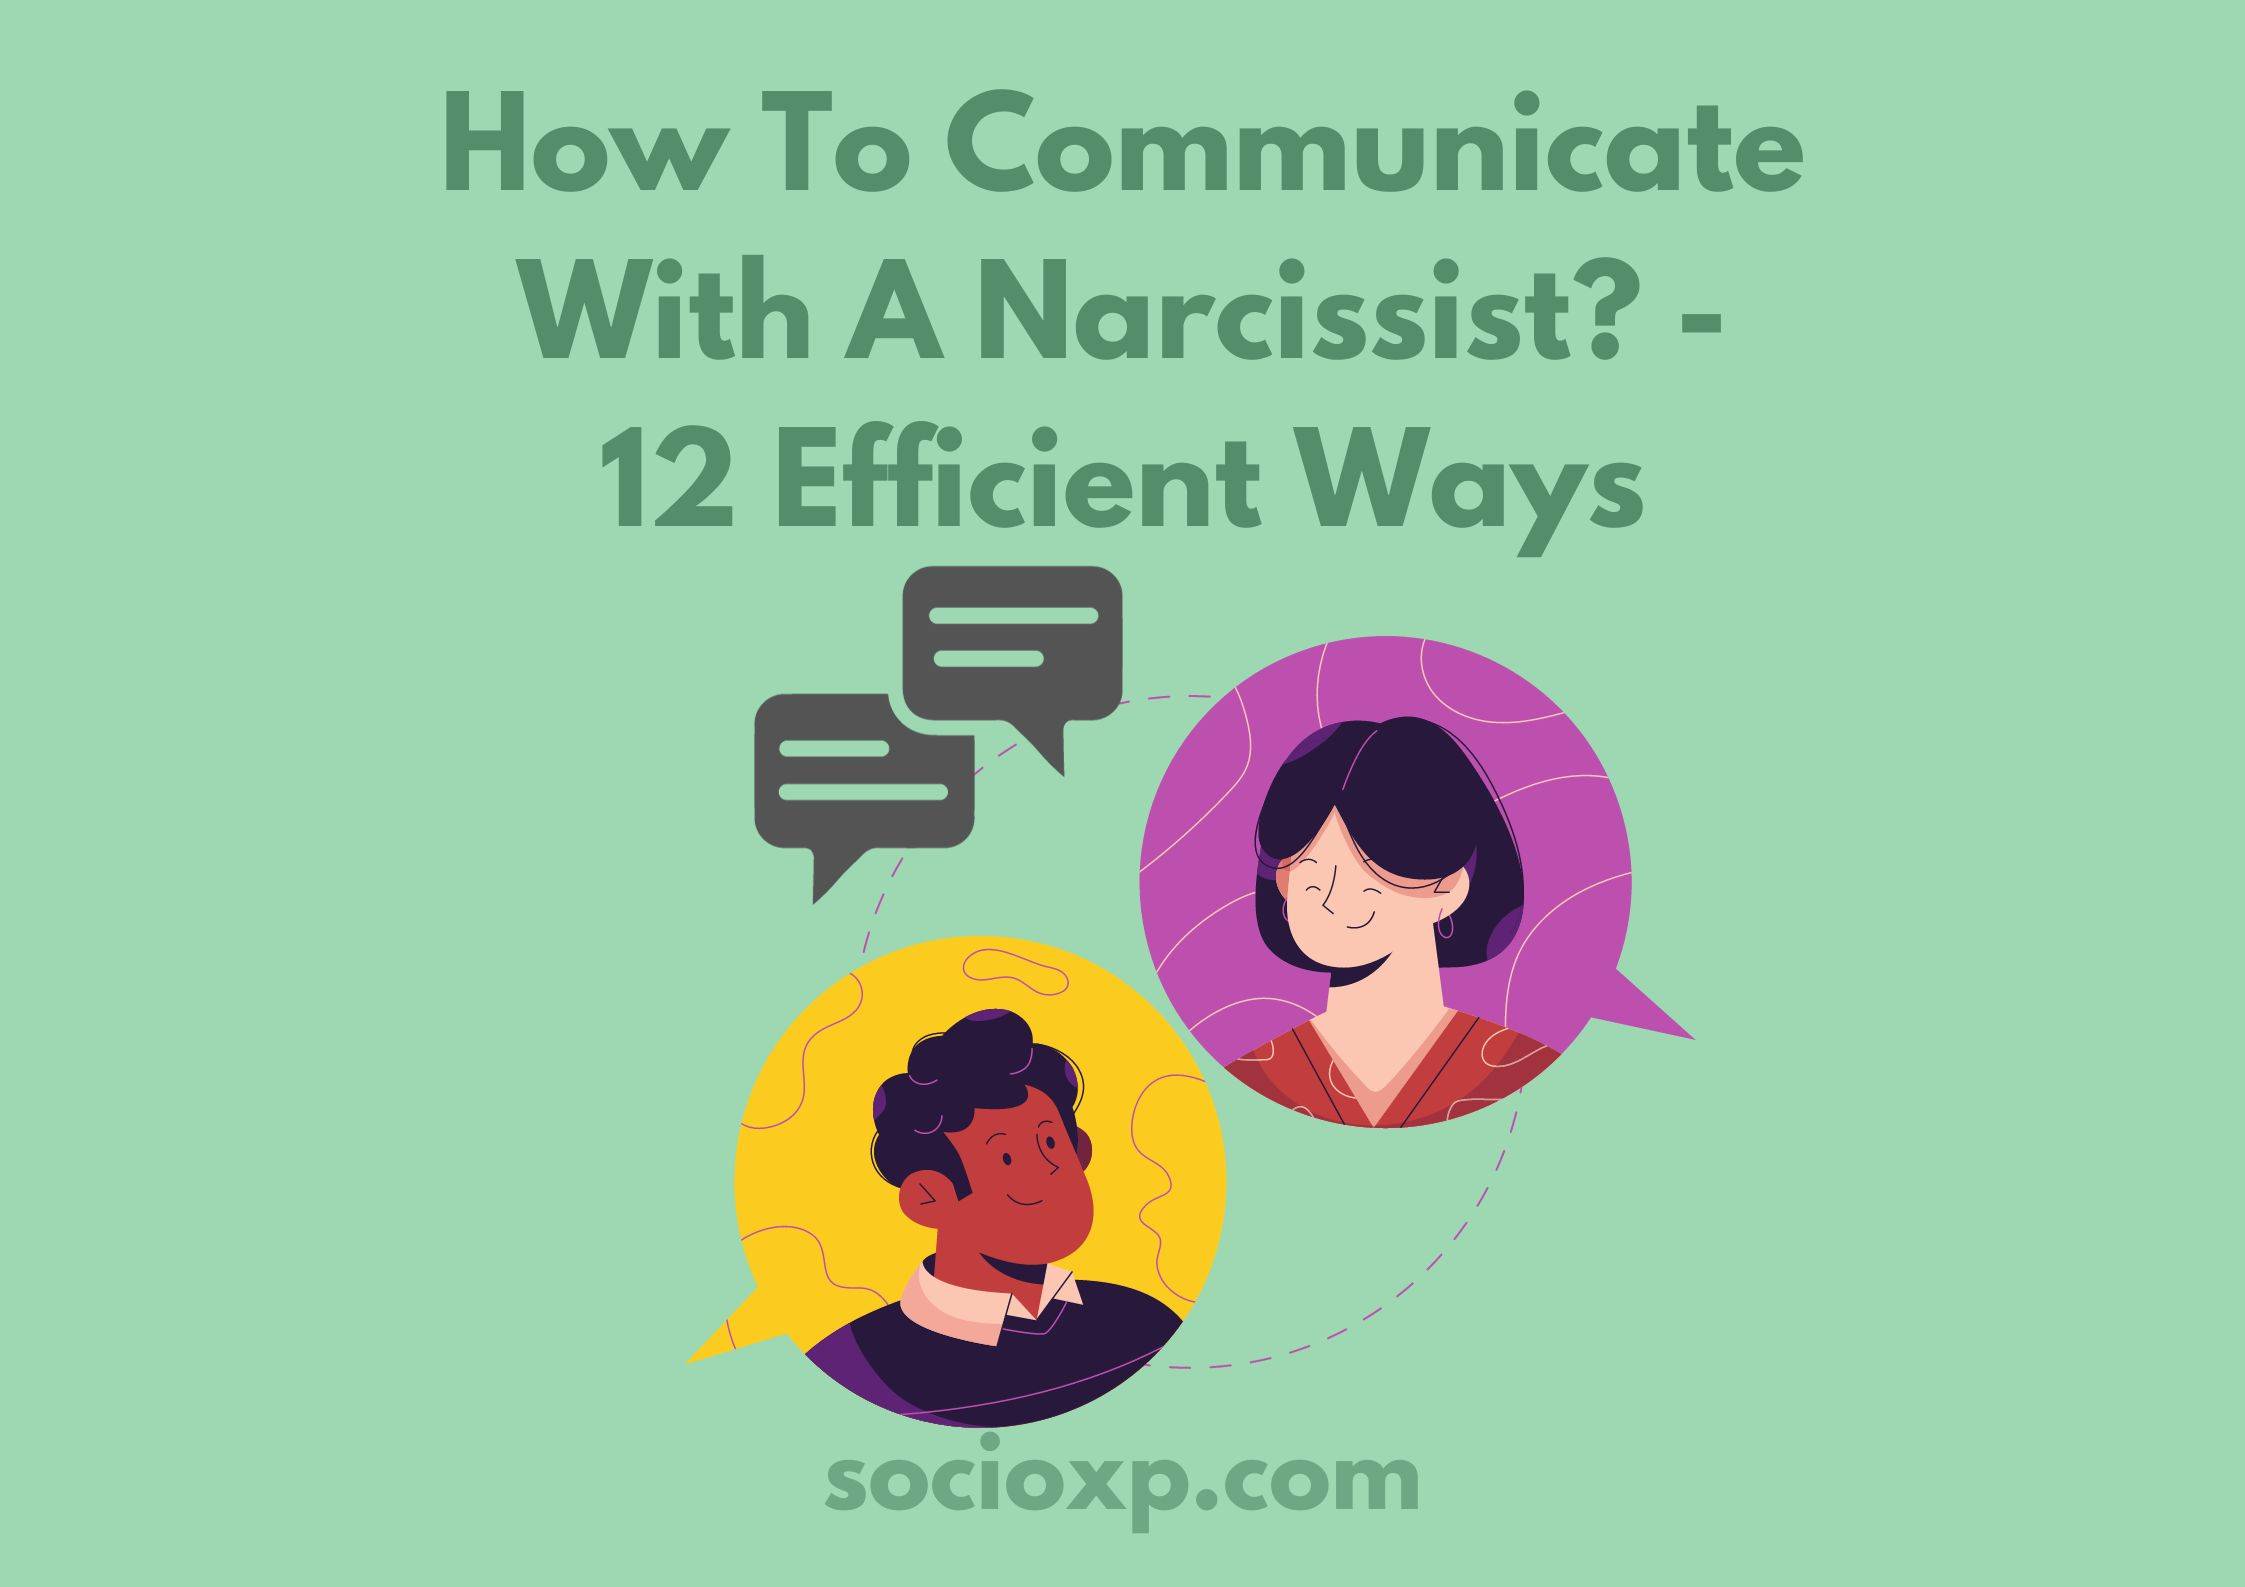 How To Communicate With A Narcissist? - 12 Efficient Ways